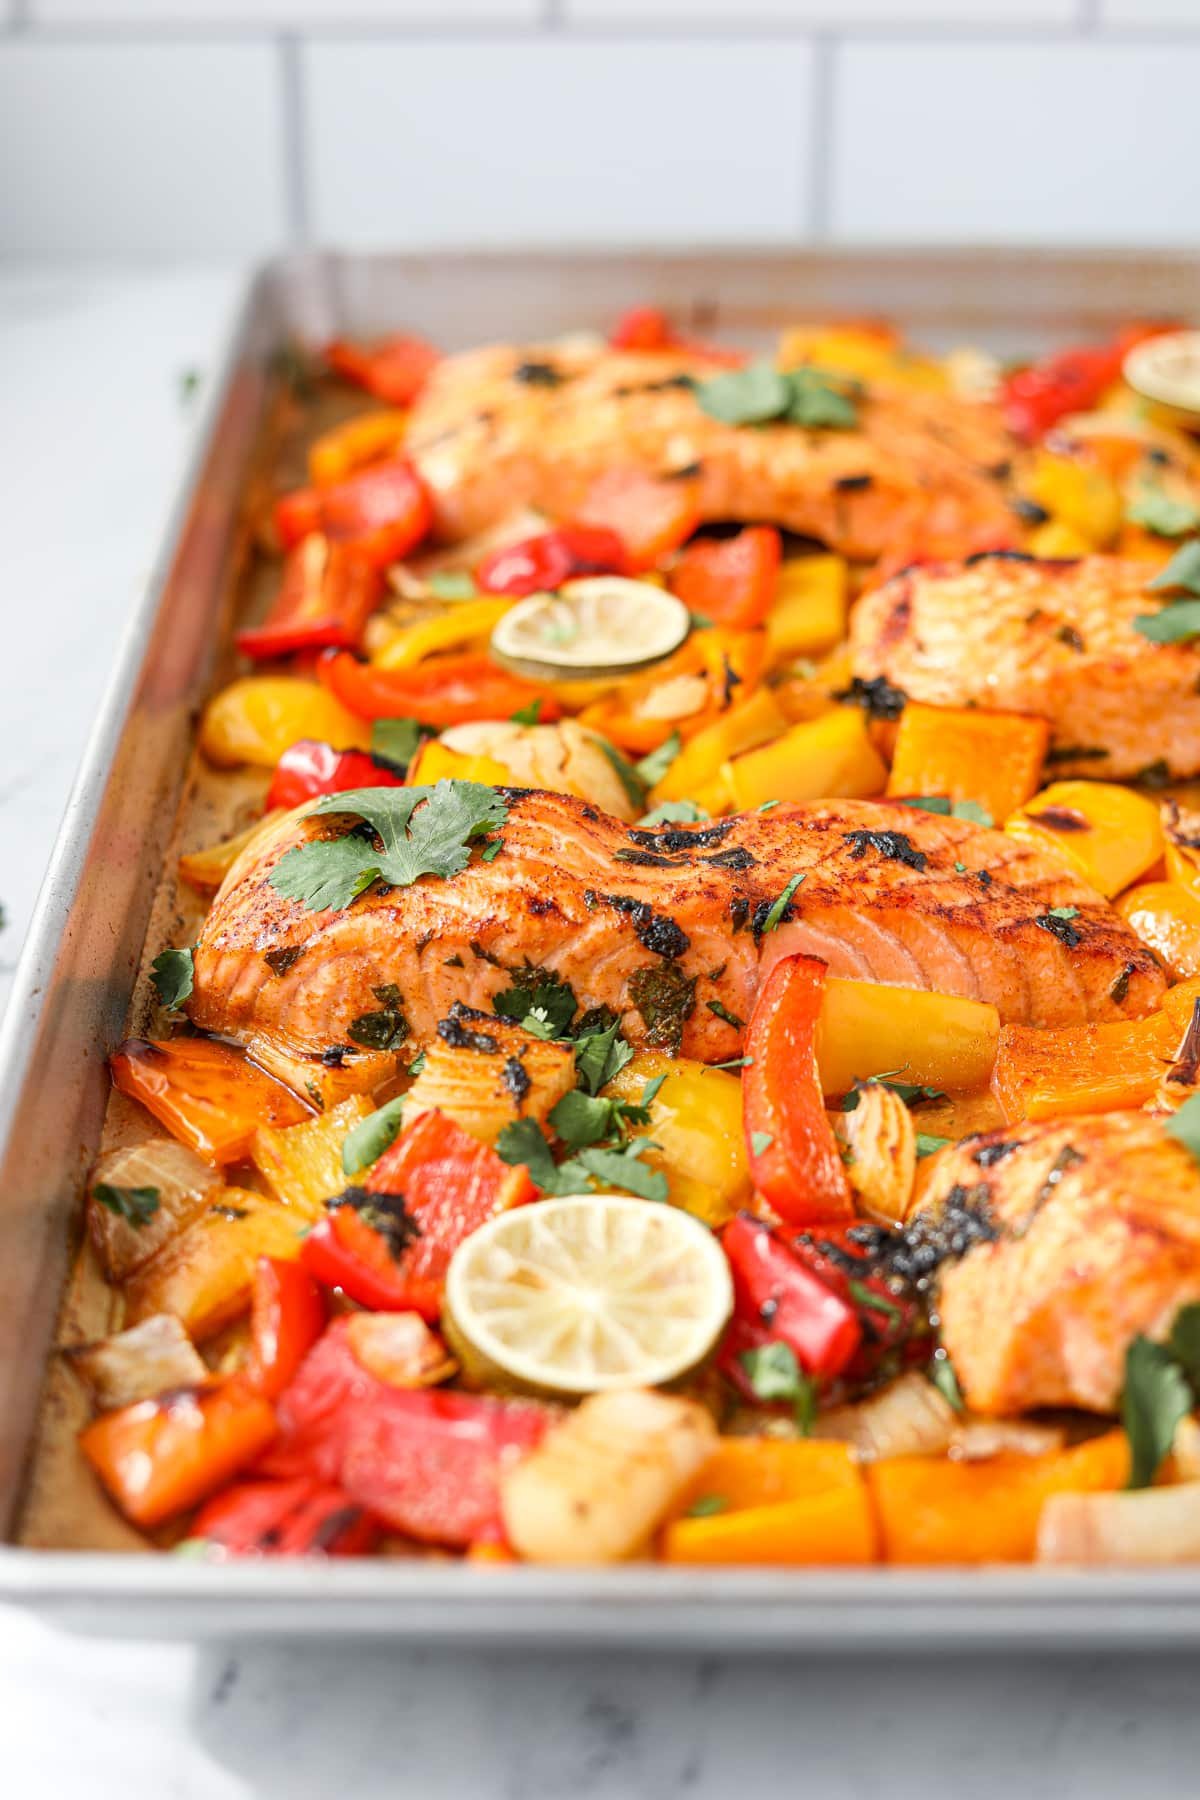 A sheet pan filled with veggies and fish.